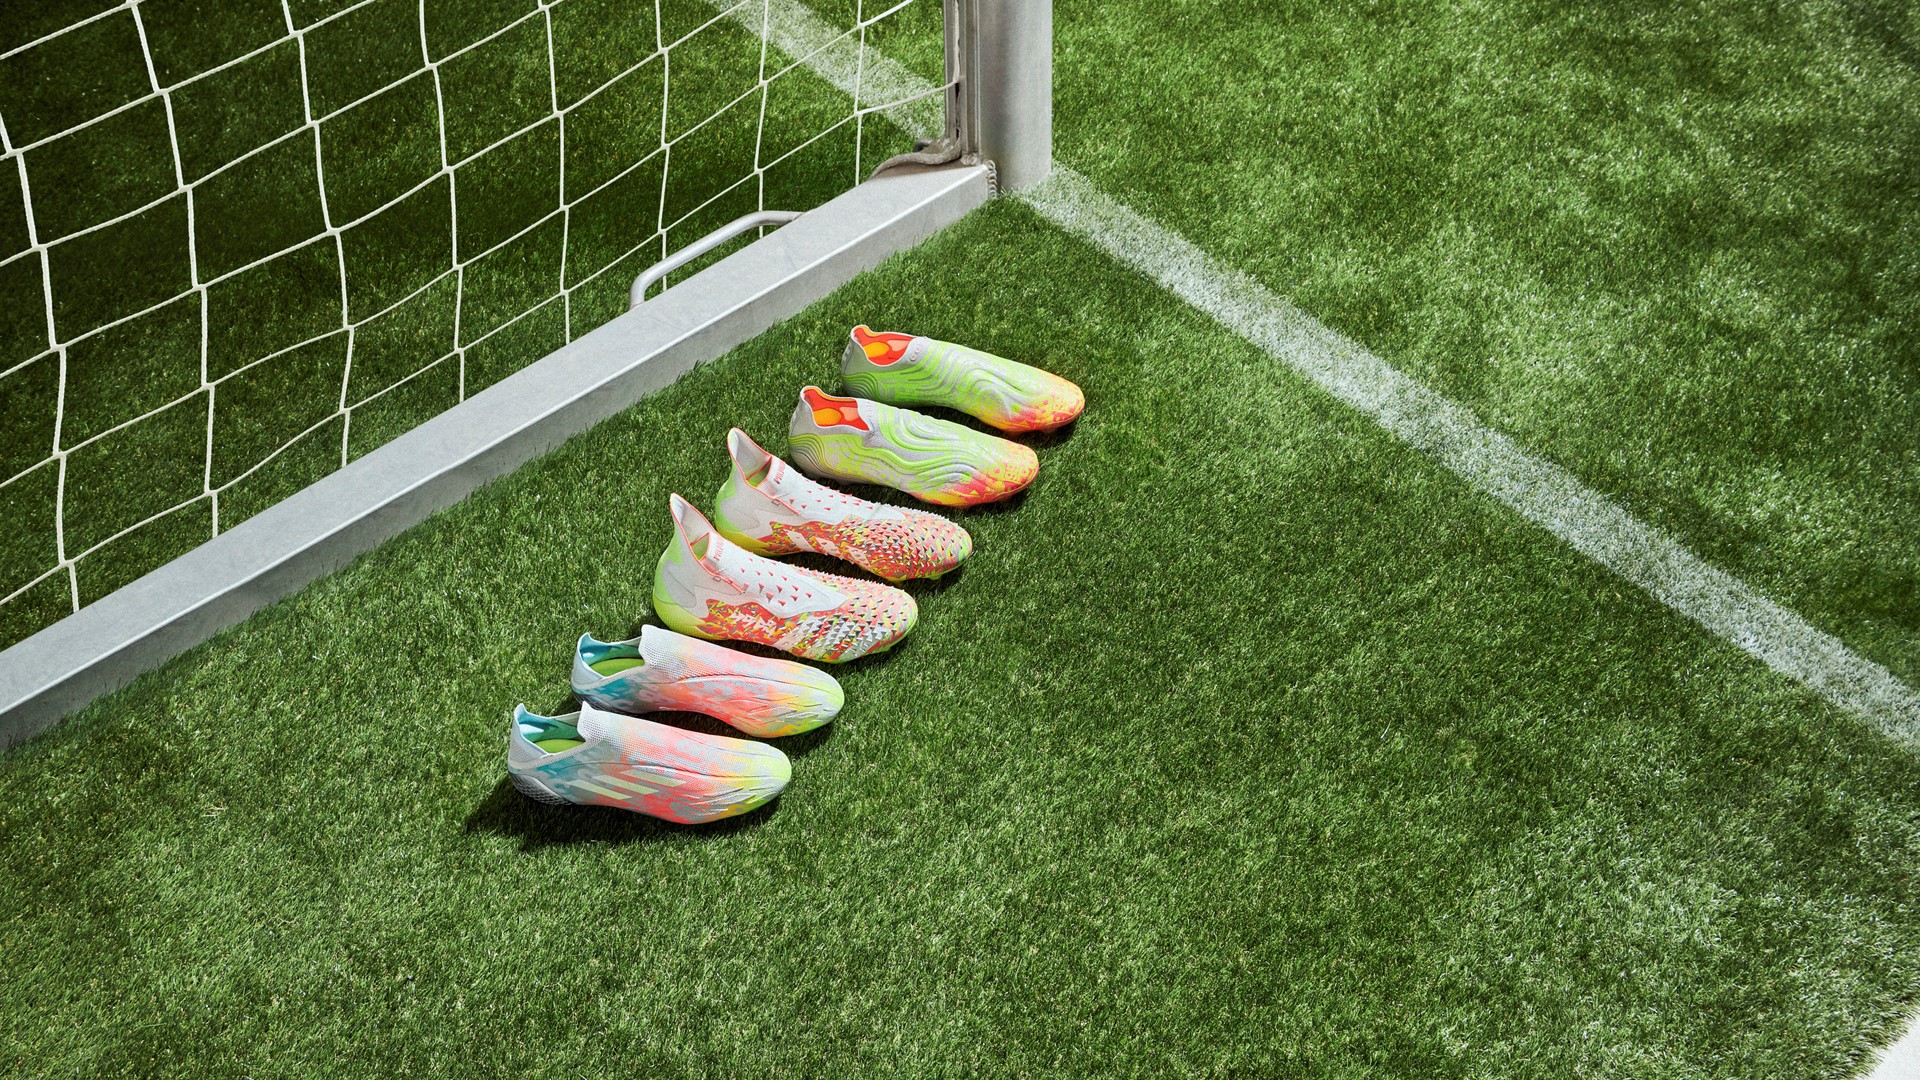 INTRODUCING NUMBERSUP: THE NEW FIFA 22 INSPIRED BOOTS DESIGNED TO PUSH PLAYERS THE TOP OF THEIR GAME